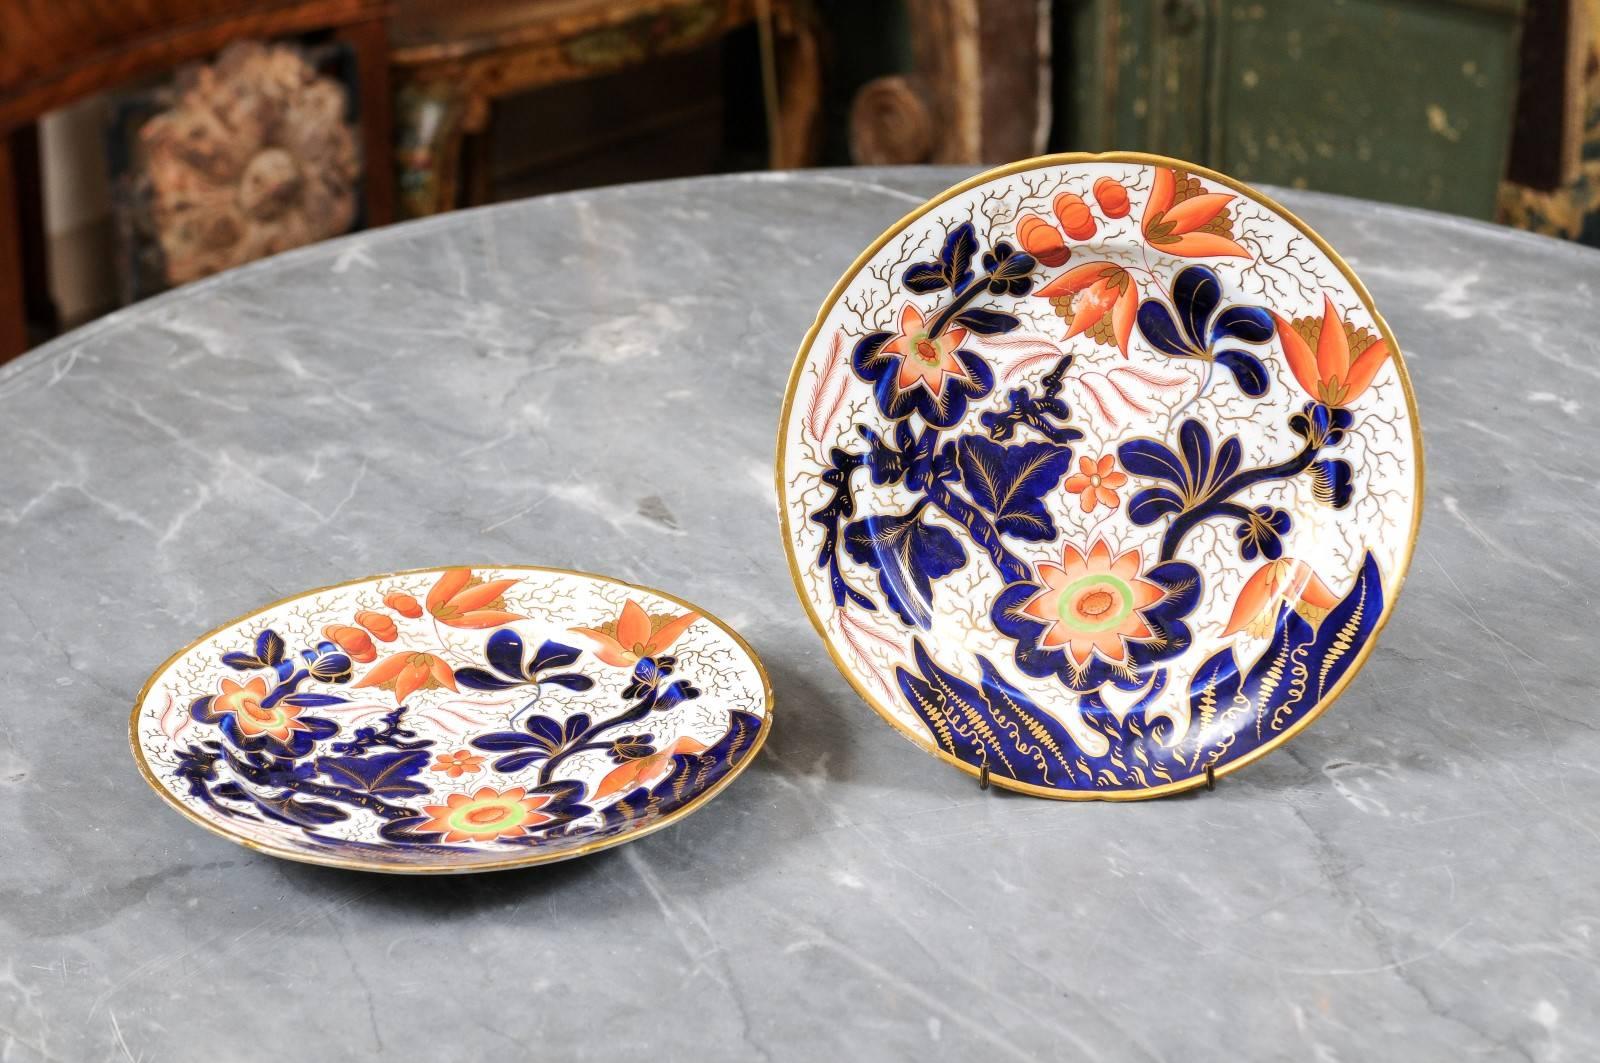 Pair of large Coalport Porcelain plates with gilt rim and accents, floral decoration in blues, reds, and greens. 19th century England. Price is for the Pair of Plates.